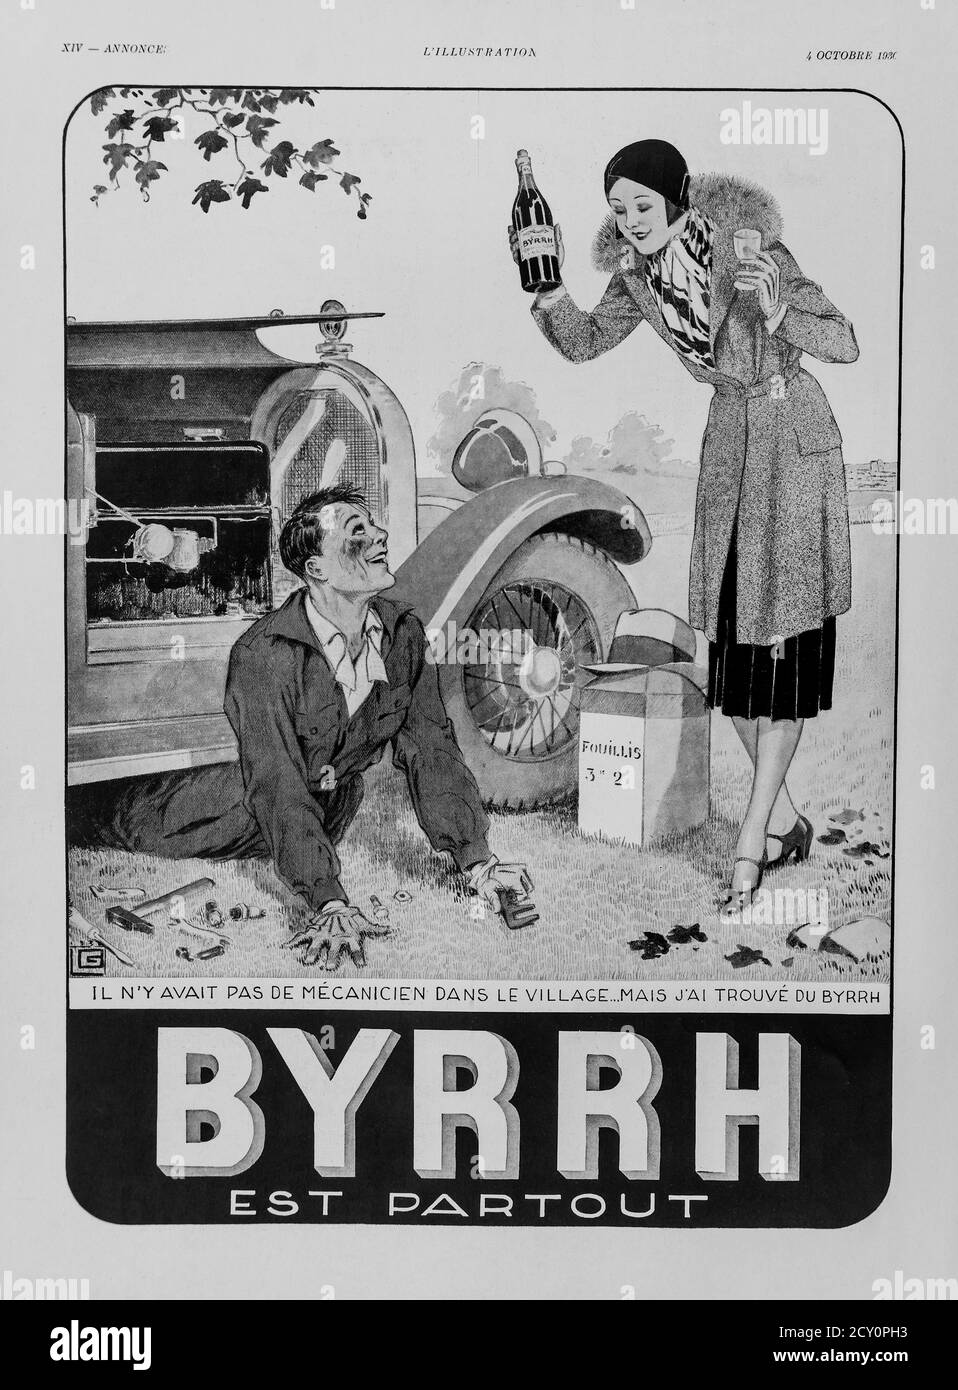 1930 advert for 'Byrrh' aromatised wine aperitif from the French 'l'Illustration' magazine. Stock Photo